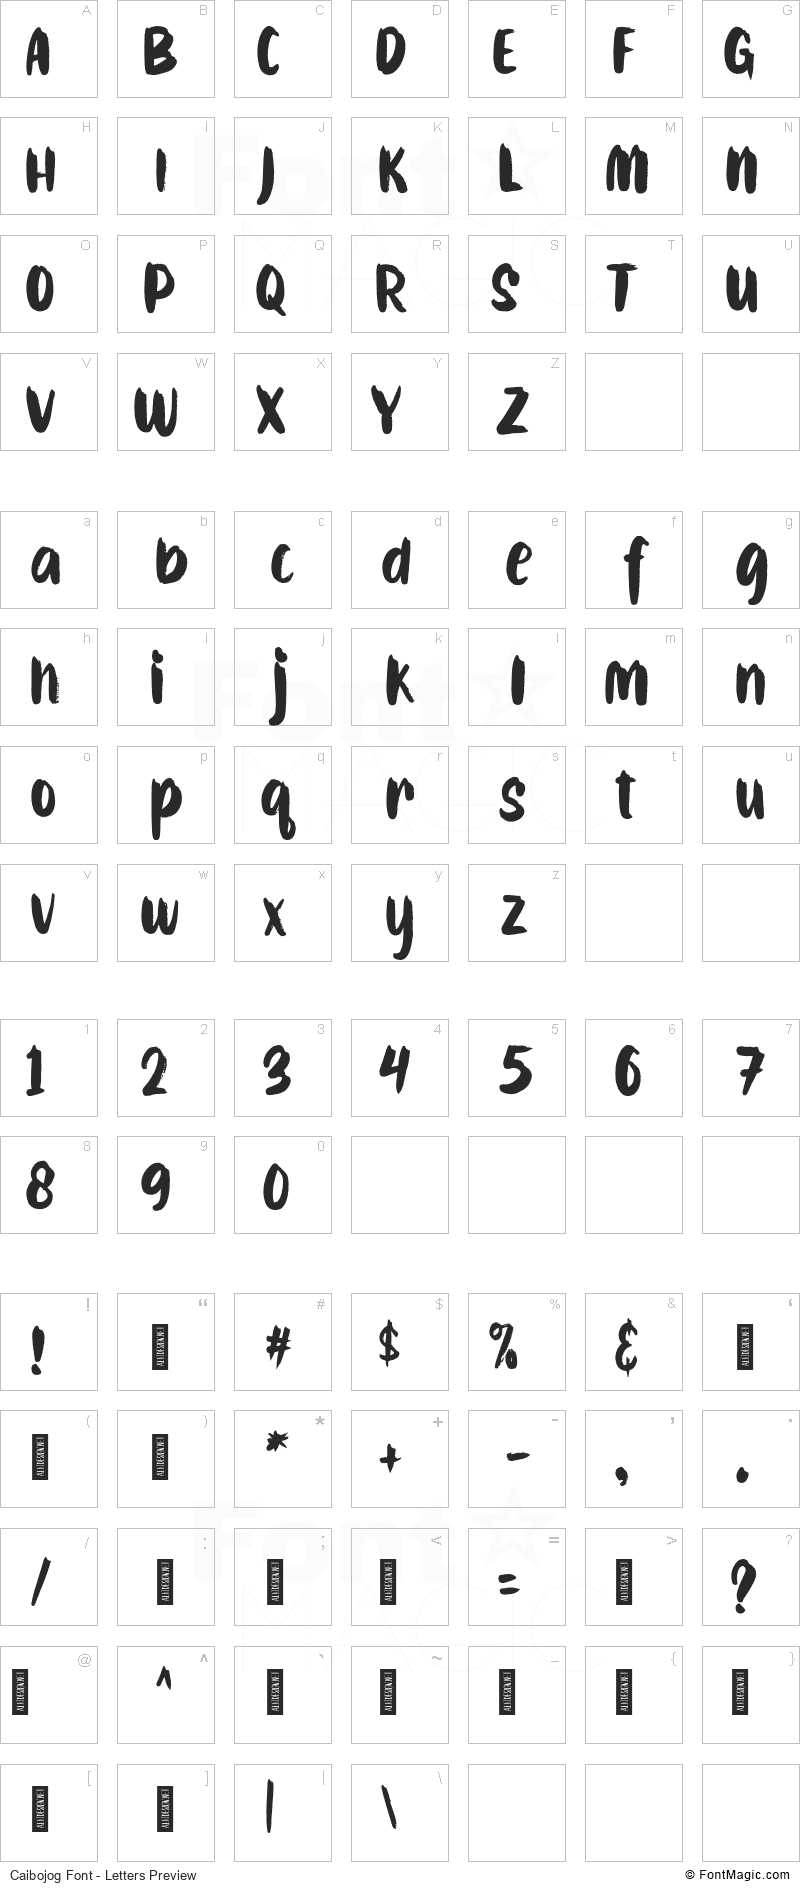 Caibojog Font - All Latters Preview Chart